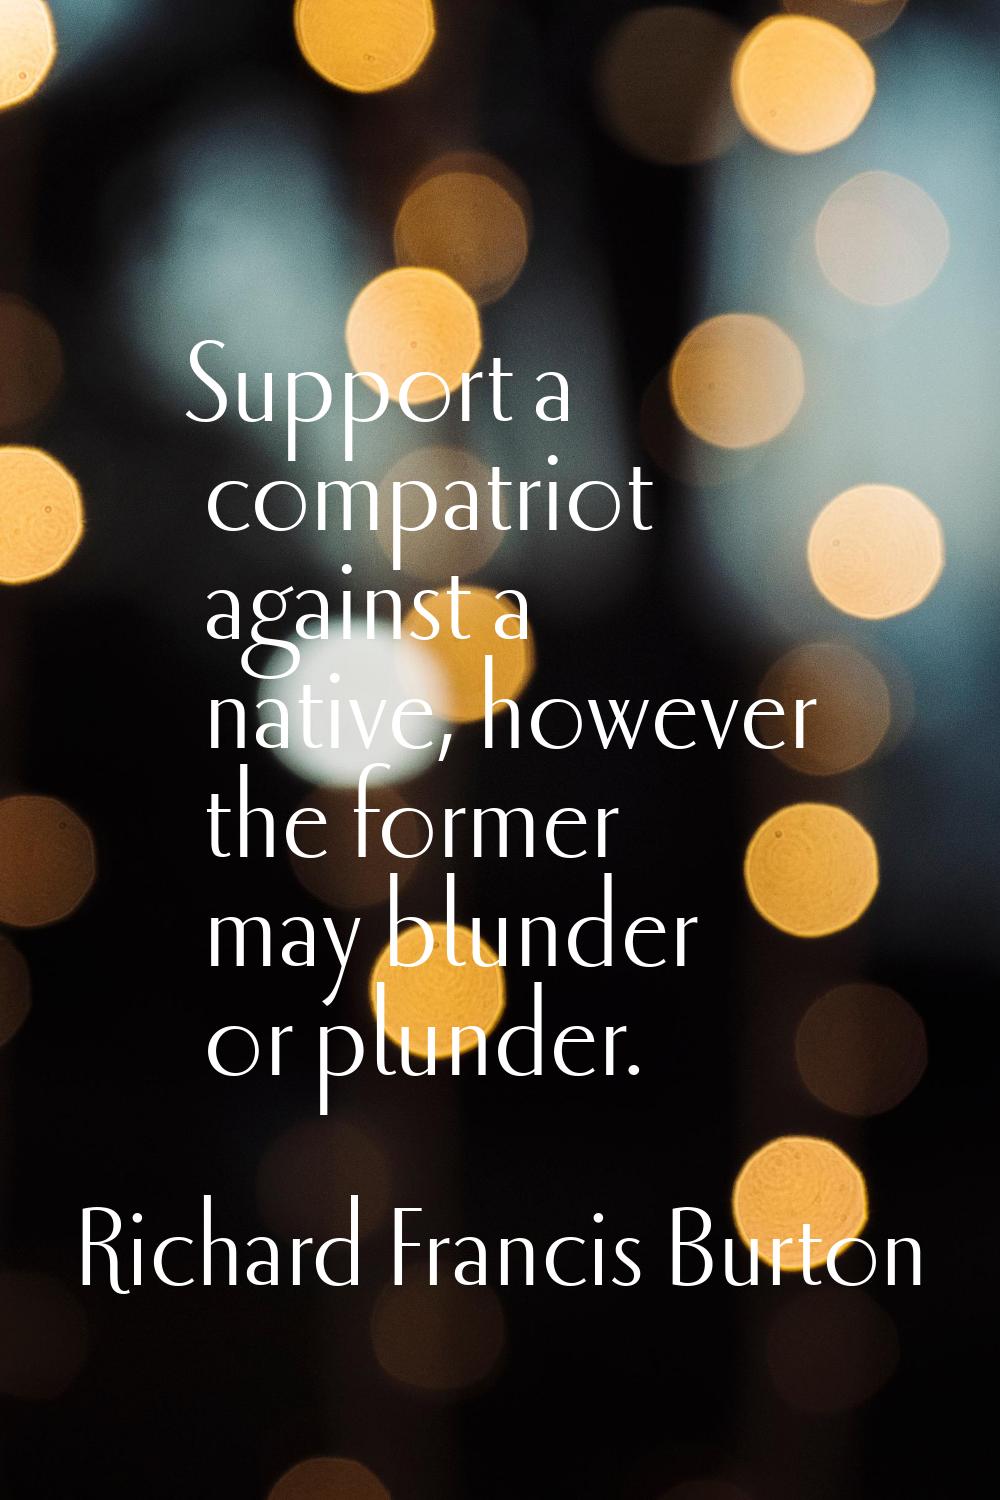 Support a compatriot against a native, however the former may blunder or plunder.